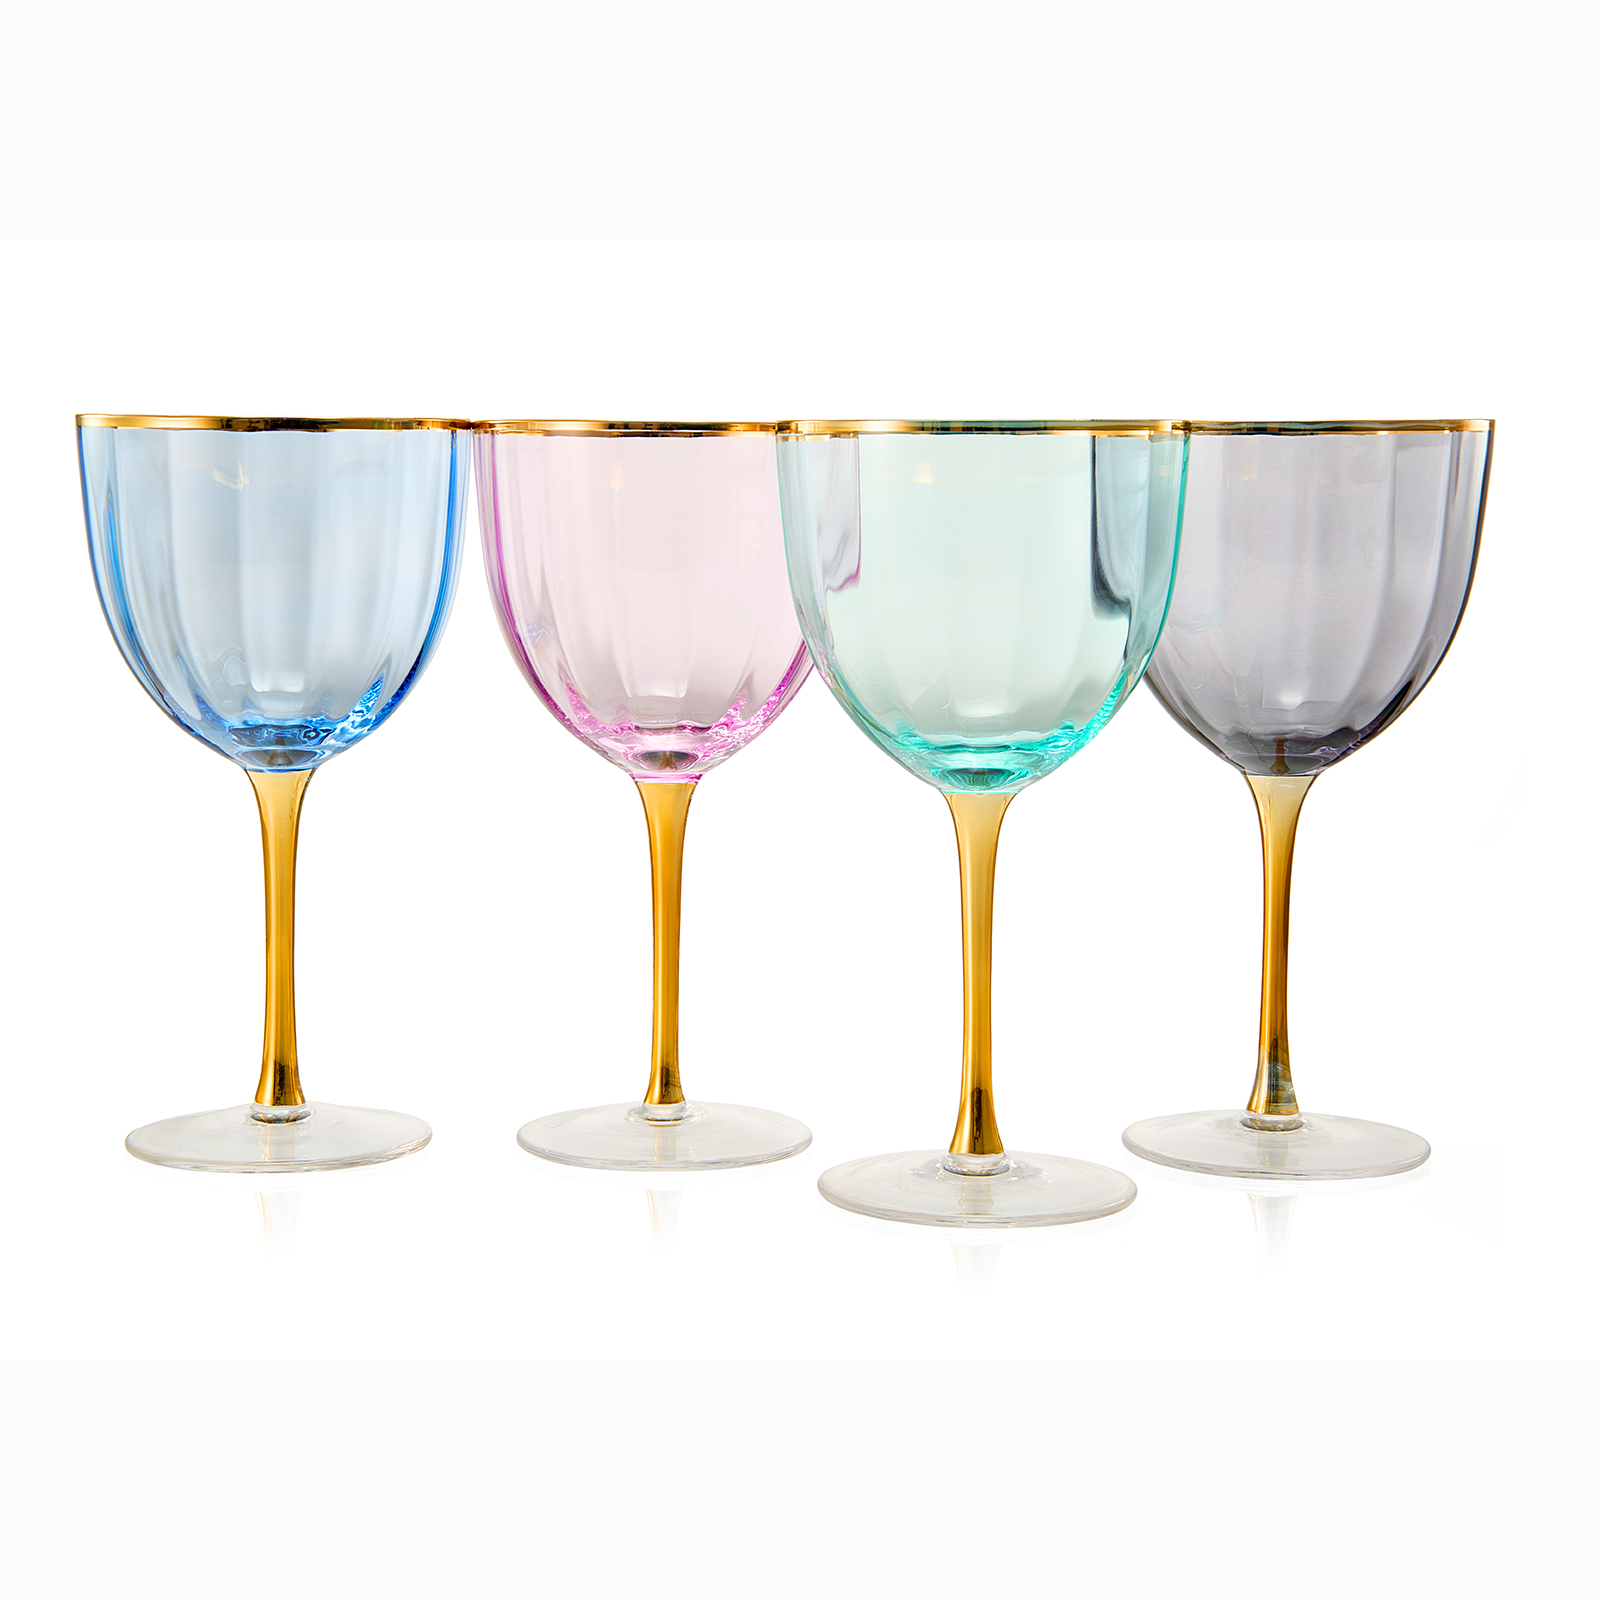 The Wine Savant Colored Blush Pink & Gilded Rim Wine Glass, Large 18oz  Glasses 2-Set Vibrant Color Vintage Tumblers for White & Red, Water, No  Stem